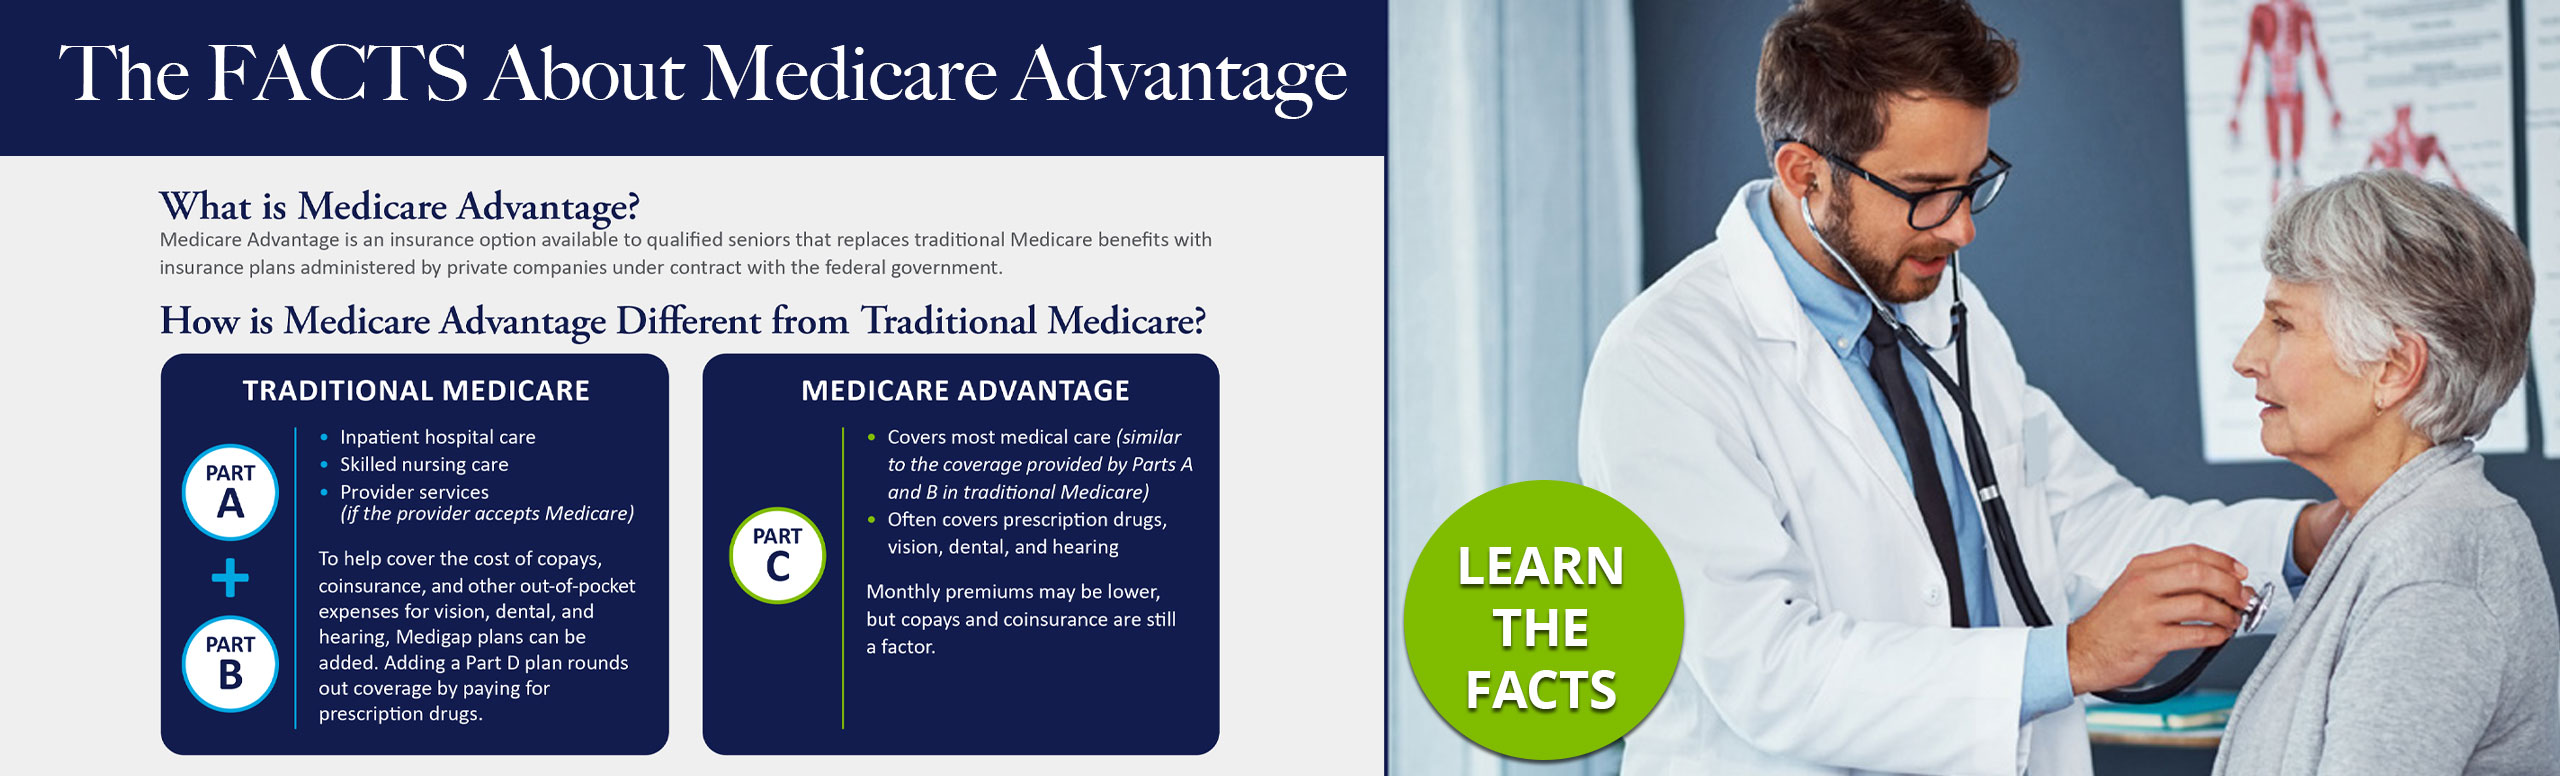 Learn the Facts about Medicare Advantage



What is Medicare Advantage?
Medicare Advantage is an insurance option available to qualified seniors that replaces traditional Medicare benefits with insurance Plans administered by private companies under contract with the federal government.

How is Medicare Advantage Different from Traditional Medicare?
Part A and Part B
TRADITIONAL MEDICARE 
Inpatient Hospital Care
Skilled Nursing Care
Provider Services if the provider accepts Medicare


To help cover the cost and copays, coinsurance, and other out of pocket expenses for vision, dental, and hearing. Medigap plans can be added. Adding a part D plan rounds out coverage by paying for prescription Drugs.

Part C
Medicarte Advantage
Covers most medical care similar to the coverage provided by Parts A and B in traditional medicare.
Often covers prescription drugs, vision, dental, and hearing.

Monthly premiums may be lower, but copays and coinsurance are still a factor